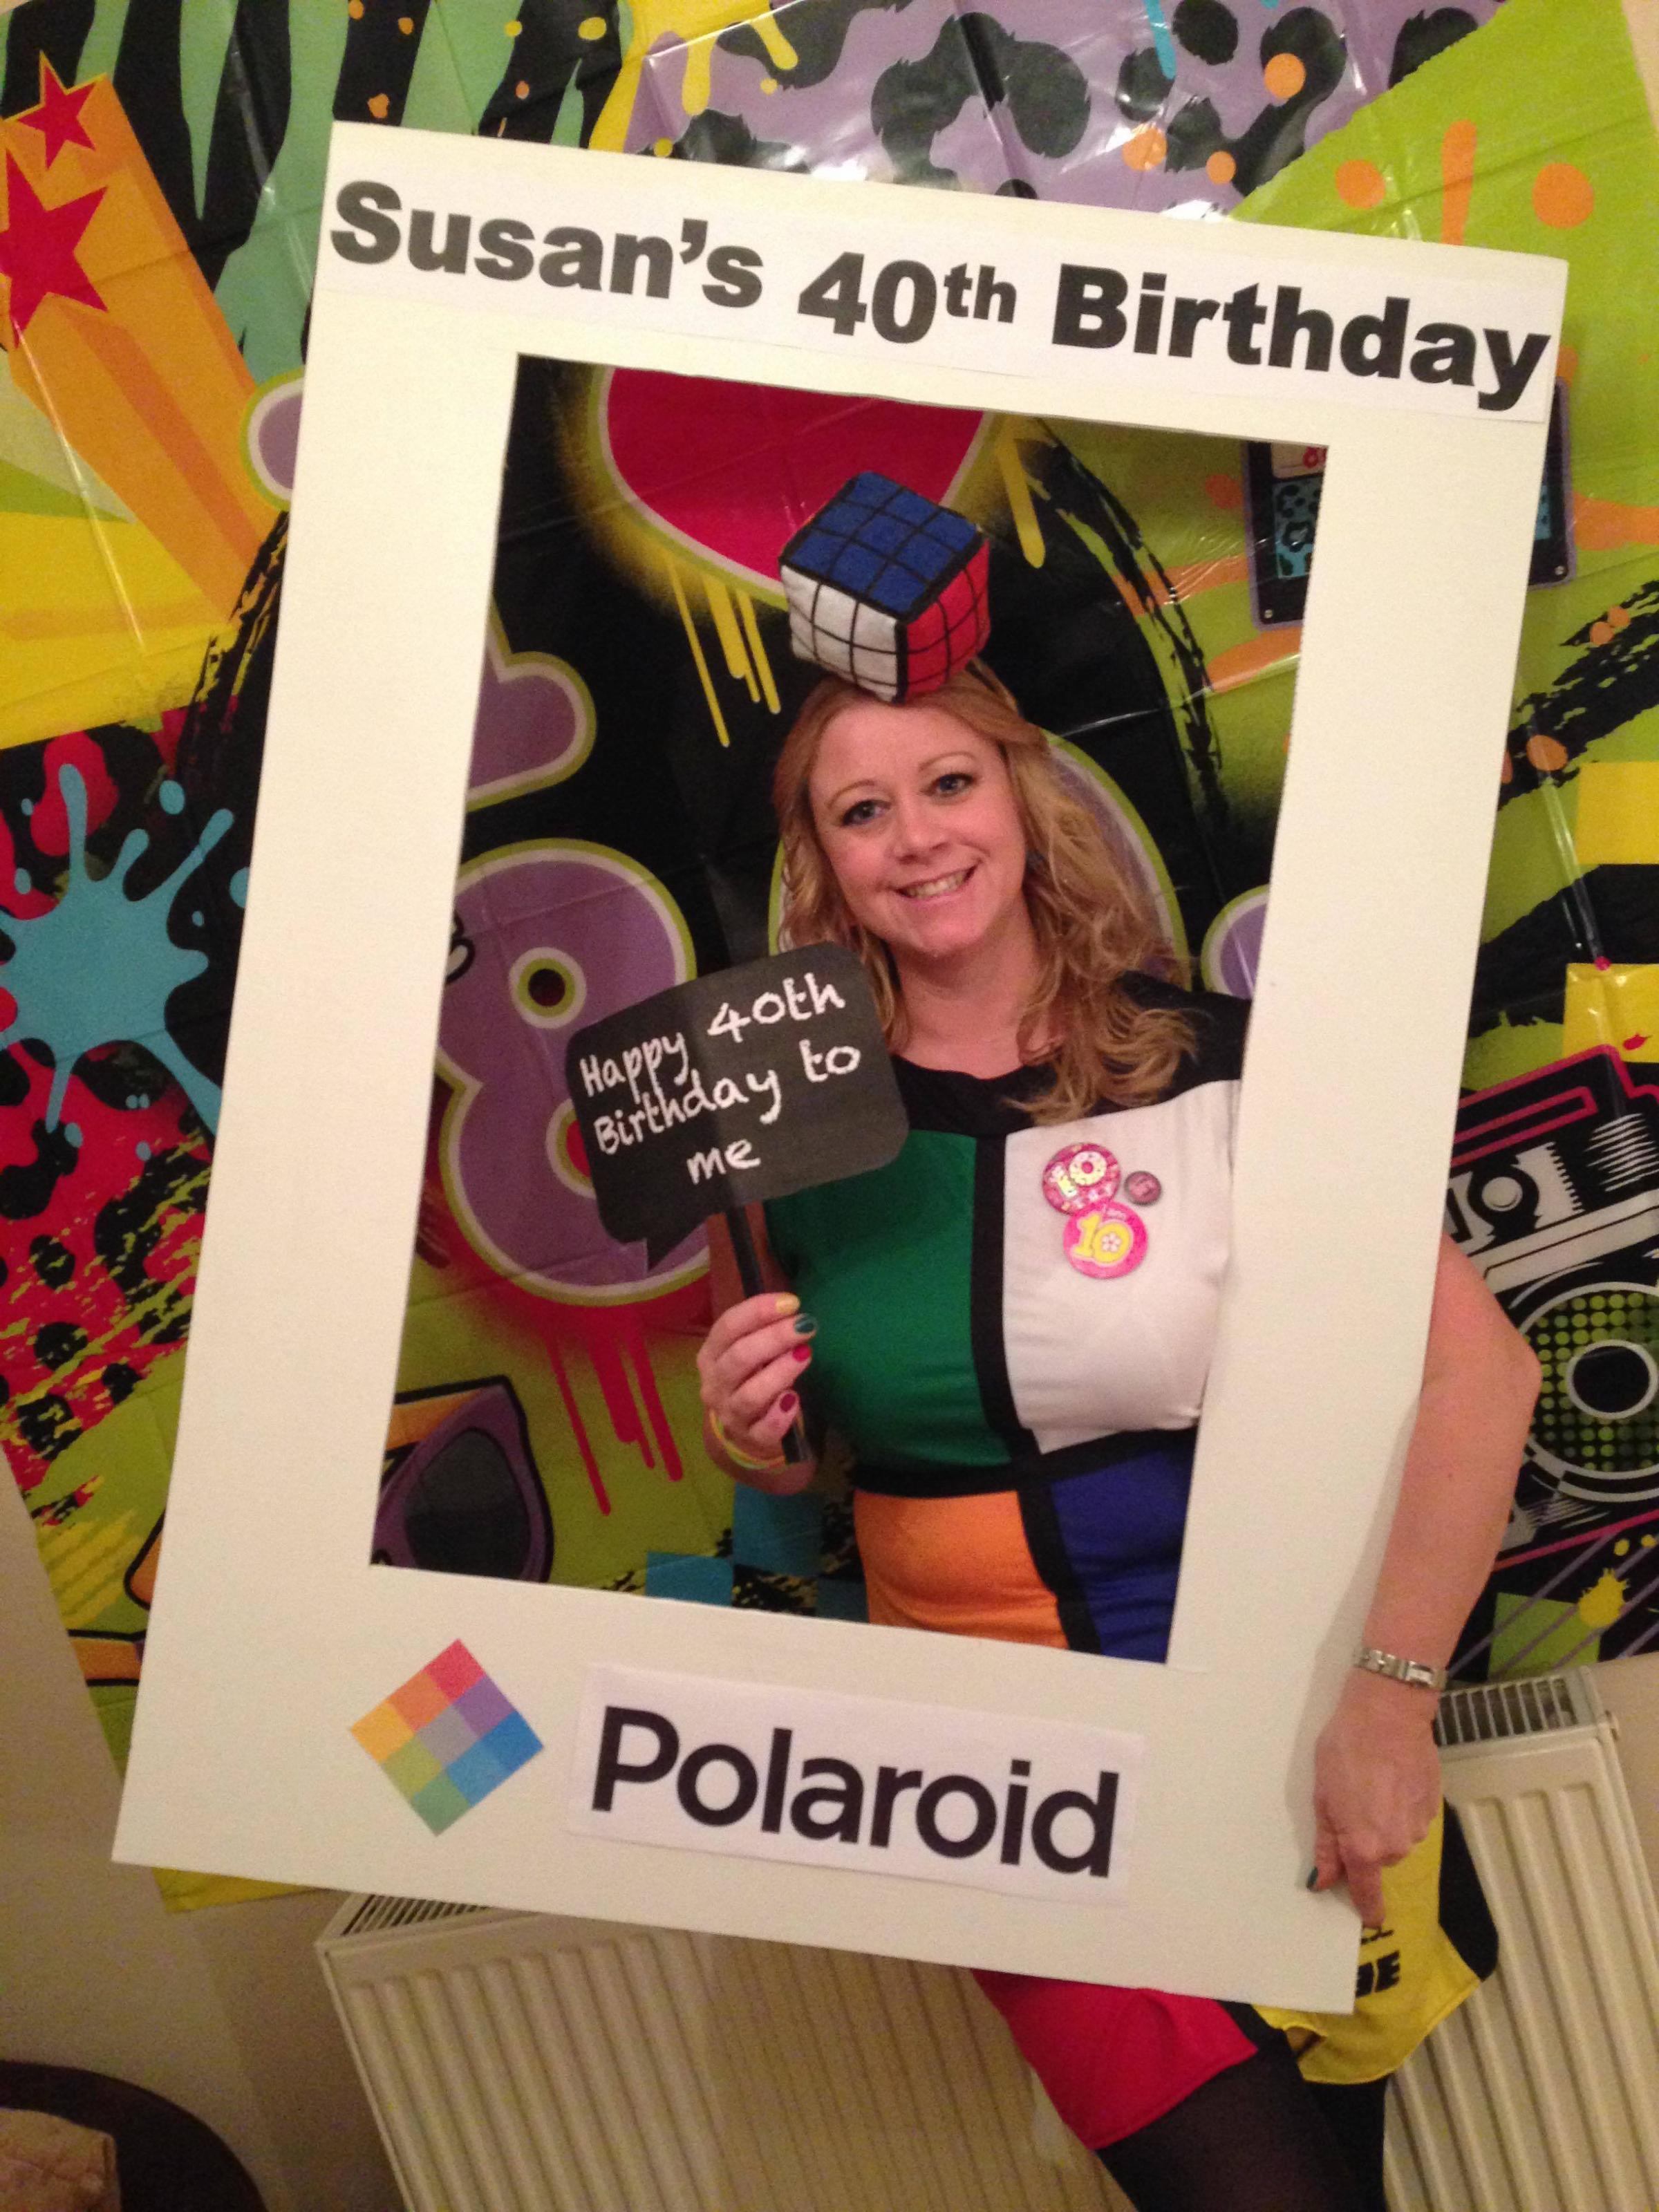 Susan Forbes celebrated her 40th birthday with an I am 10 party and a 1980s theme